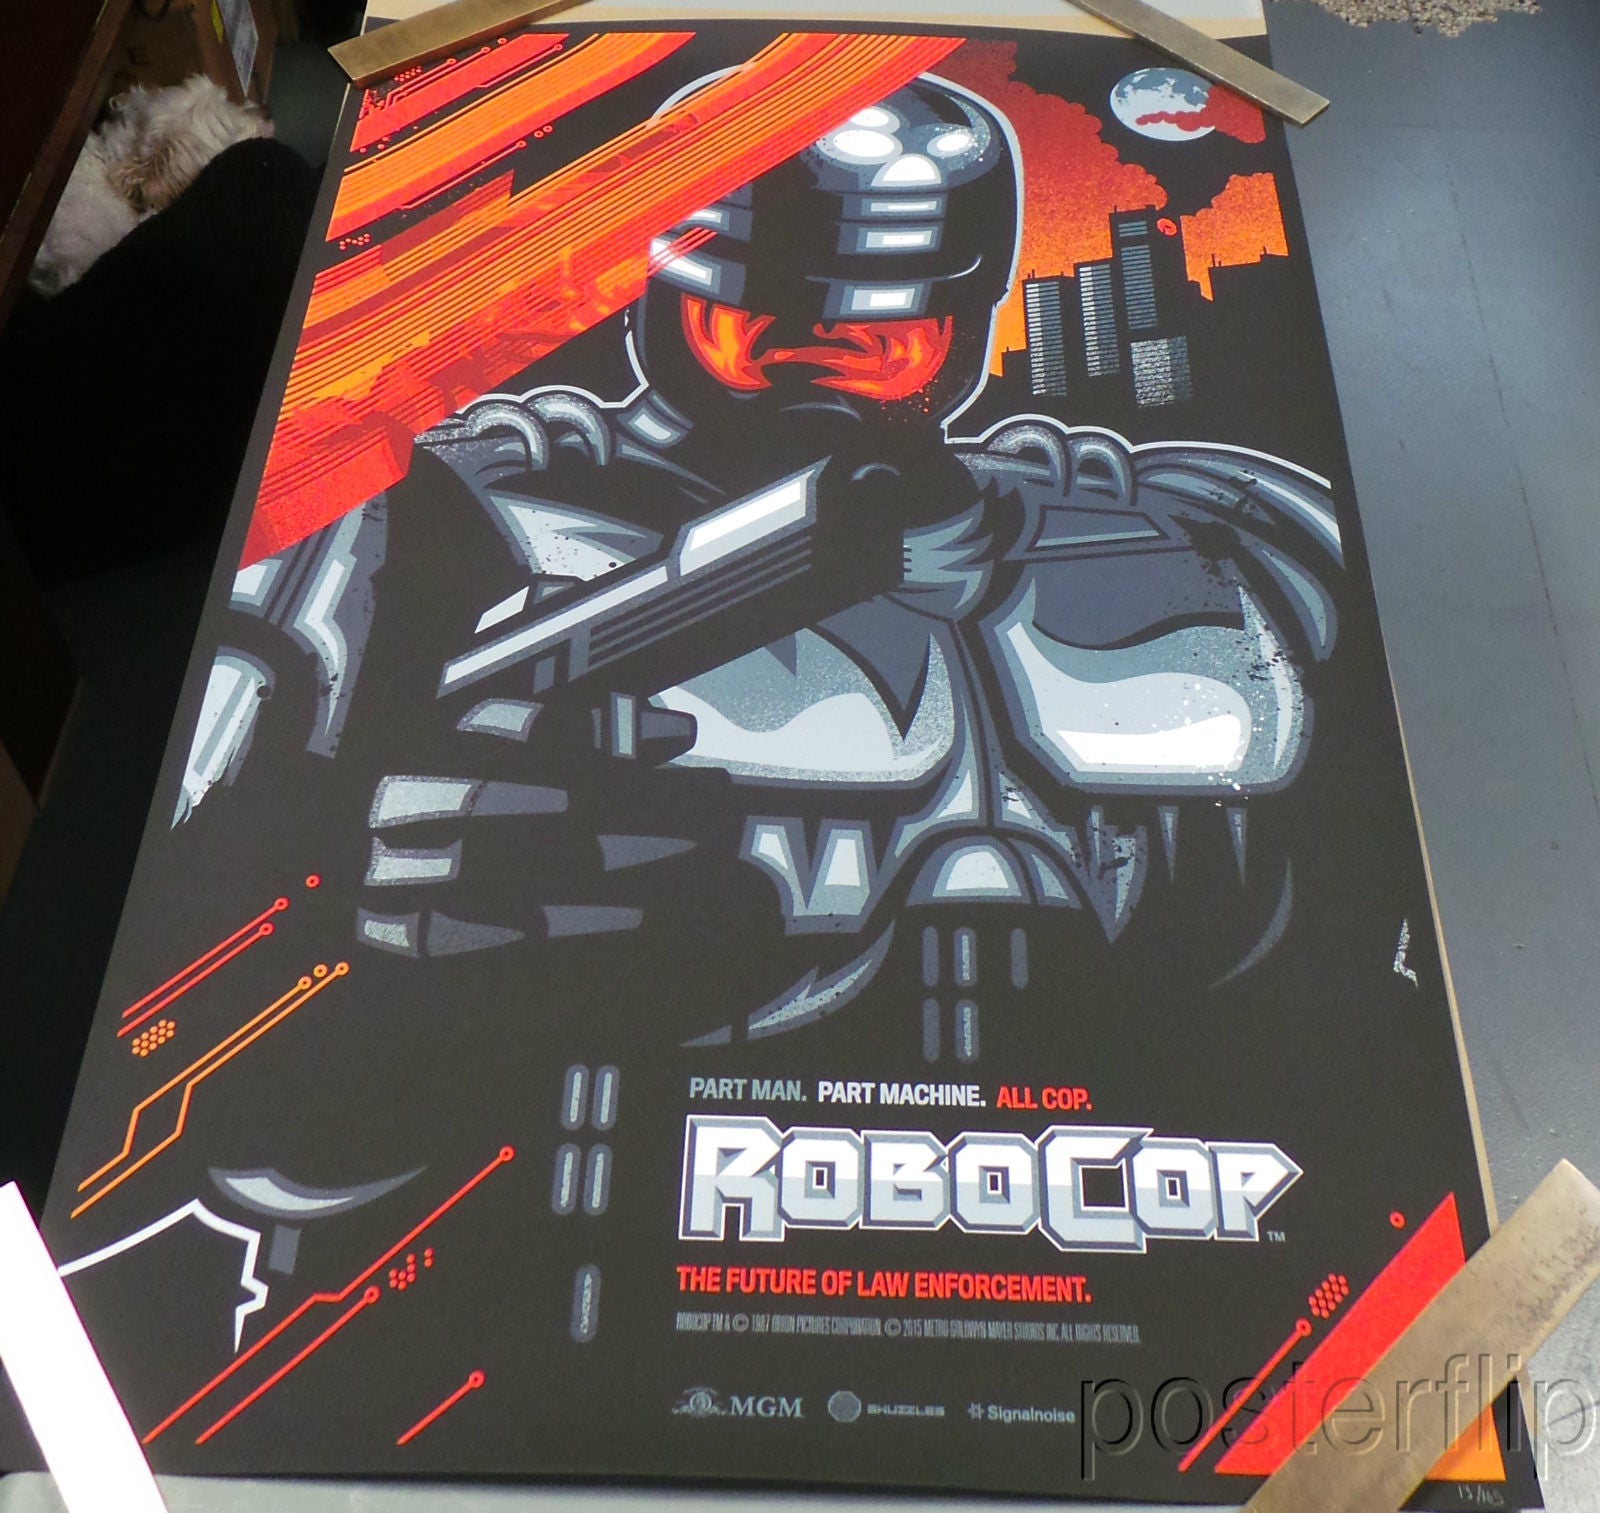 Title:  "Robocop"  Artist:  James White  Edition:  xx/165  Type:  Screen print poster  Size: 36" x 24"  Notes:  Released by Skuzzles in 2015, hand numbered.  Print is stored flat in very good condition. Following purchase, prints are rolled in archival paper and shipped with bubble wrap in sturdy cardboard tubes.  Check out our other listings for more hard-to-find and out-of-print posters.